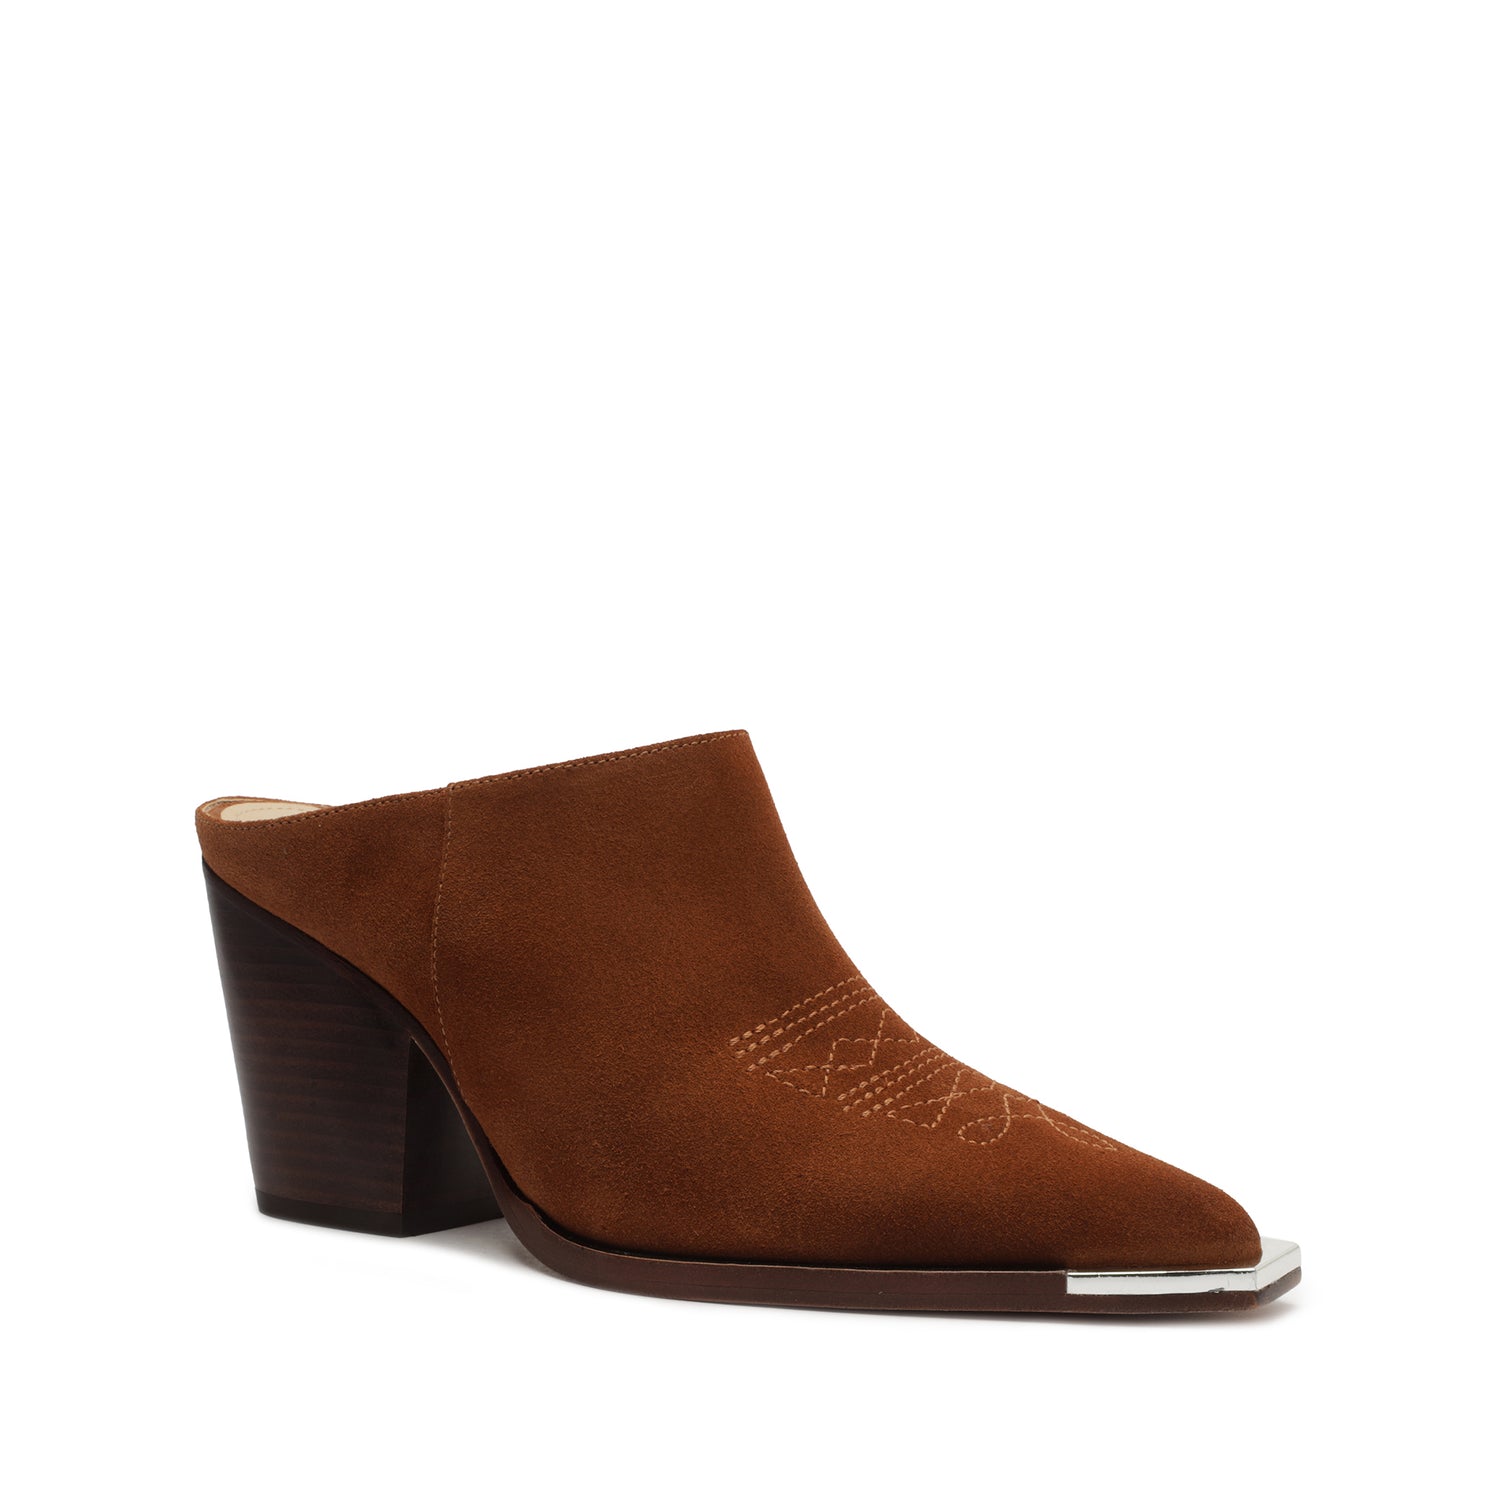 Alley Cow Suede Pump New Wood Cow Suede